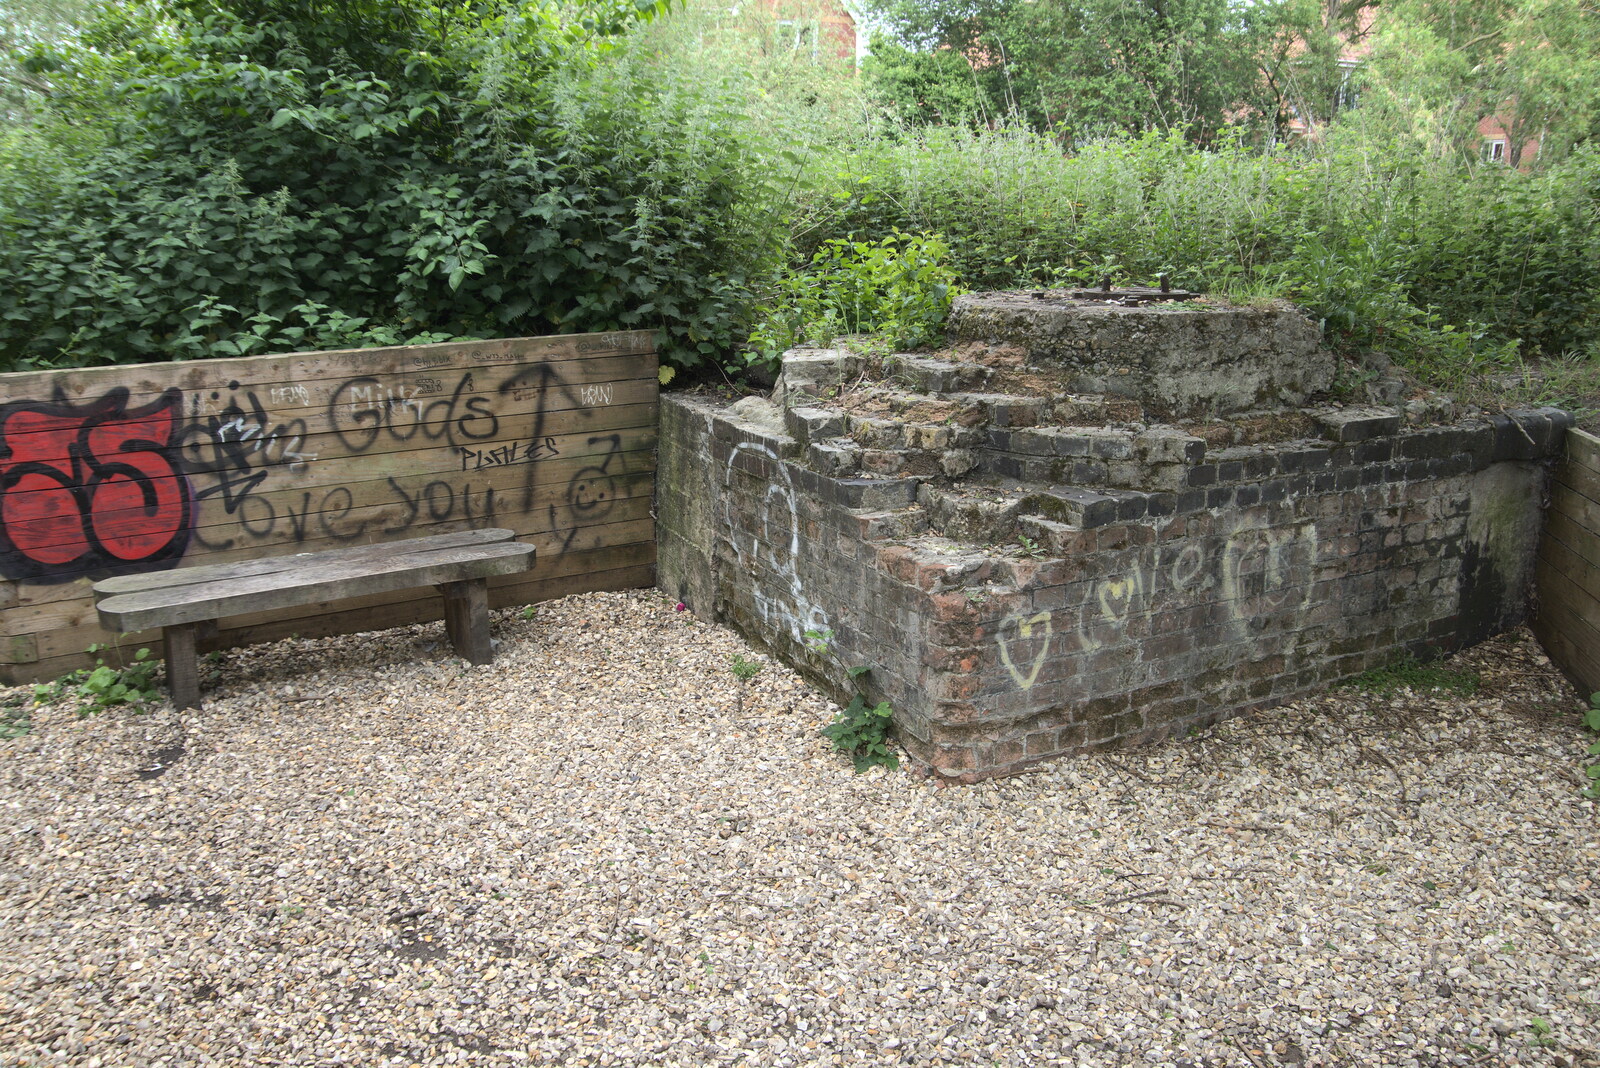 More ghostly remains of the old station from Discovering the Hidden City: Norwich, Norfolk - 23rd May 2022